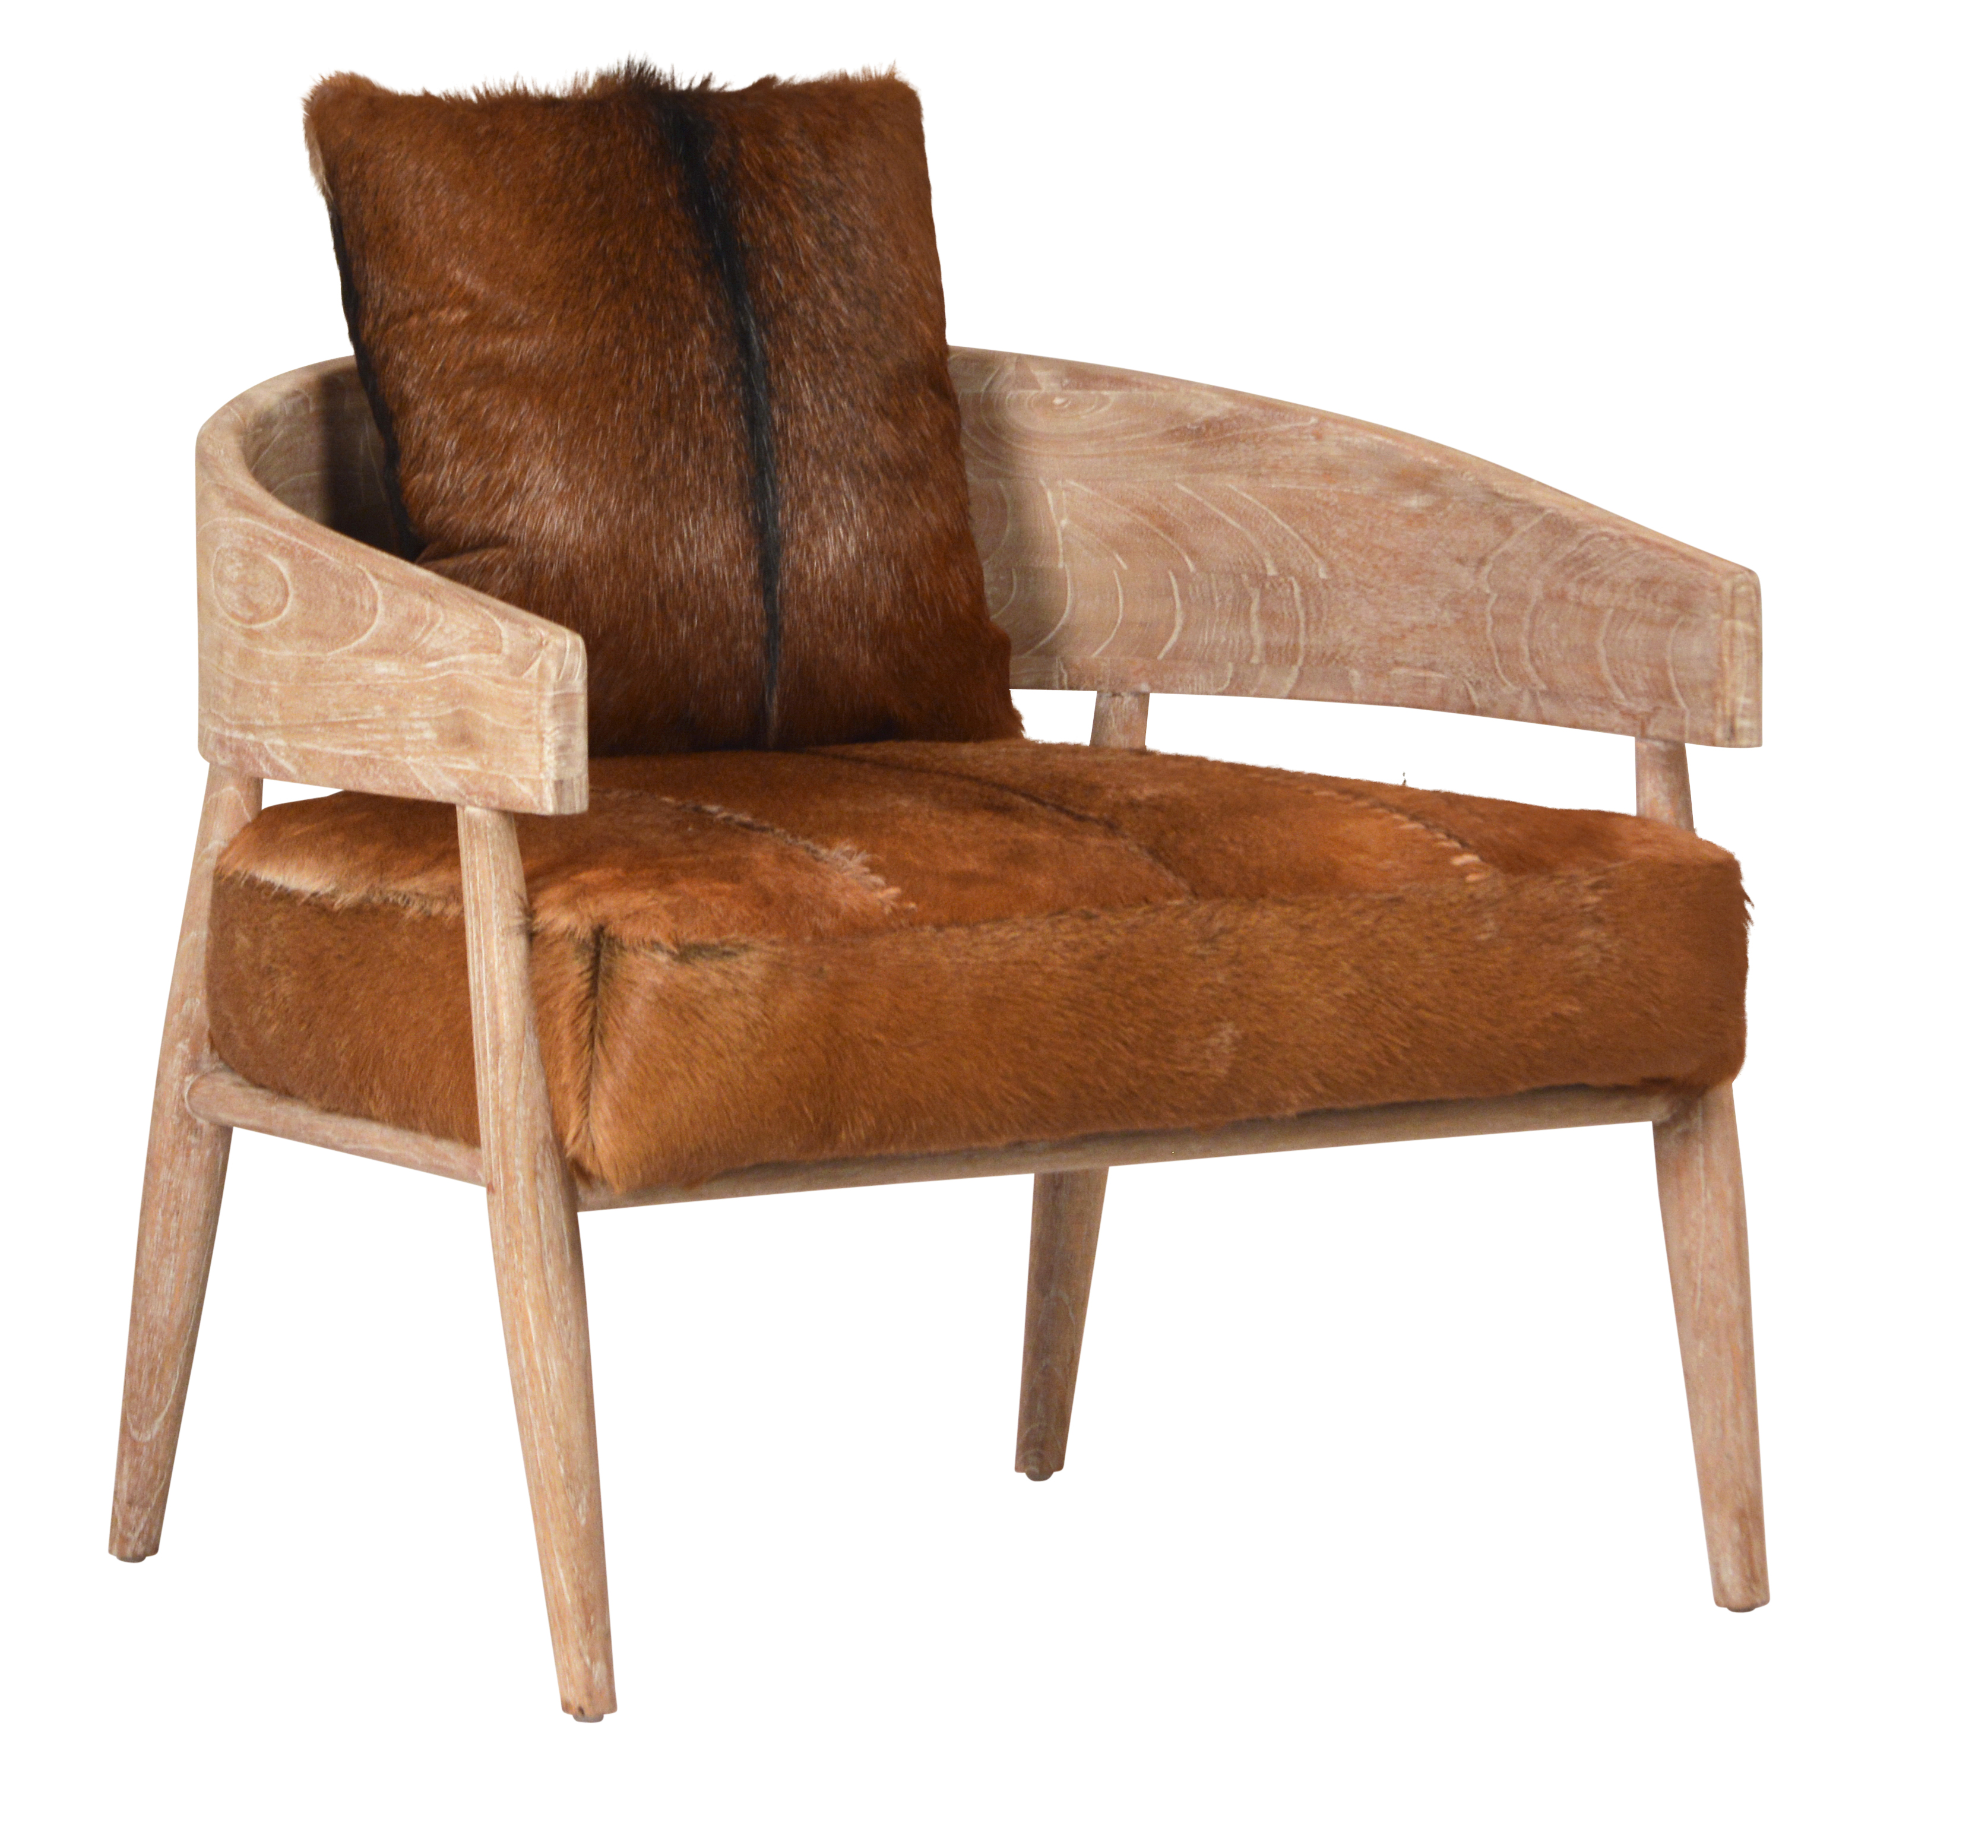 Melli Brown Goat Hide Curved Back Lounge Chair